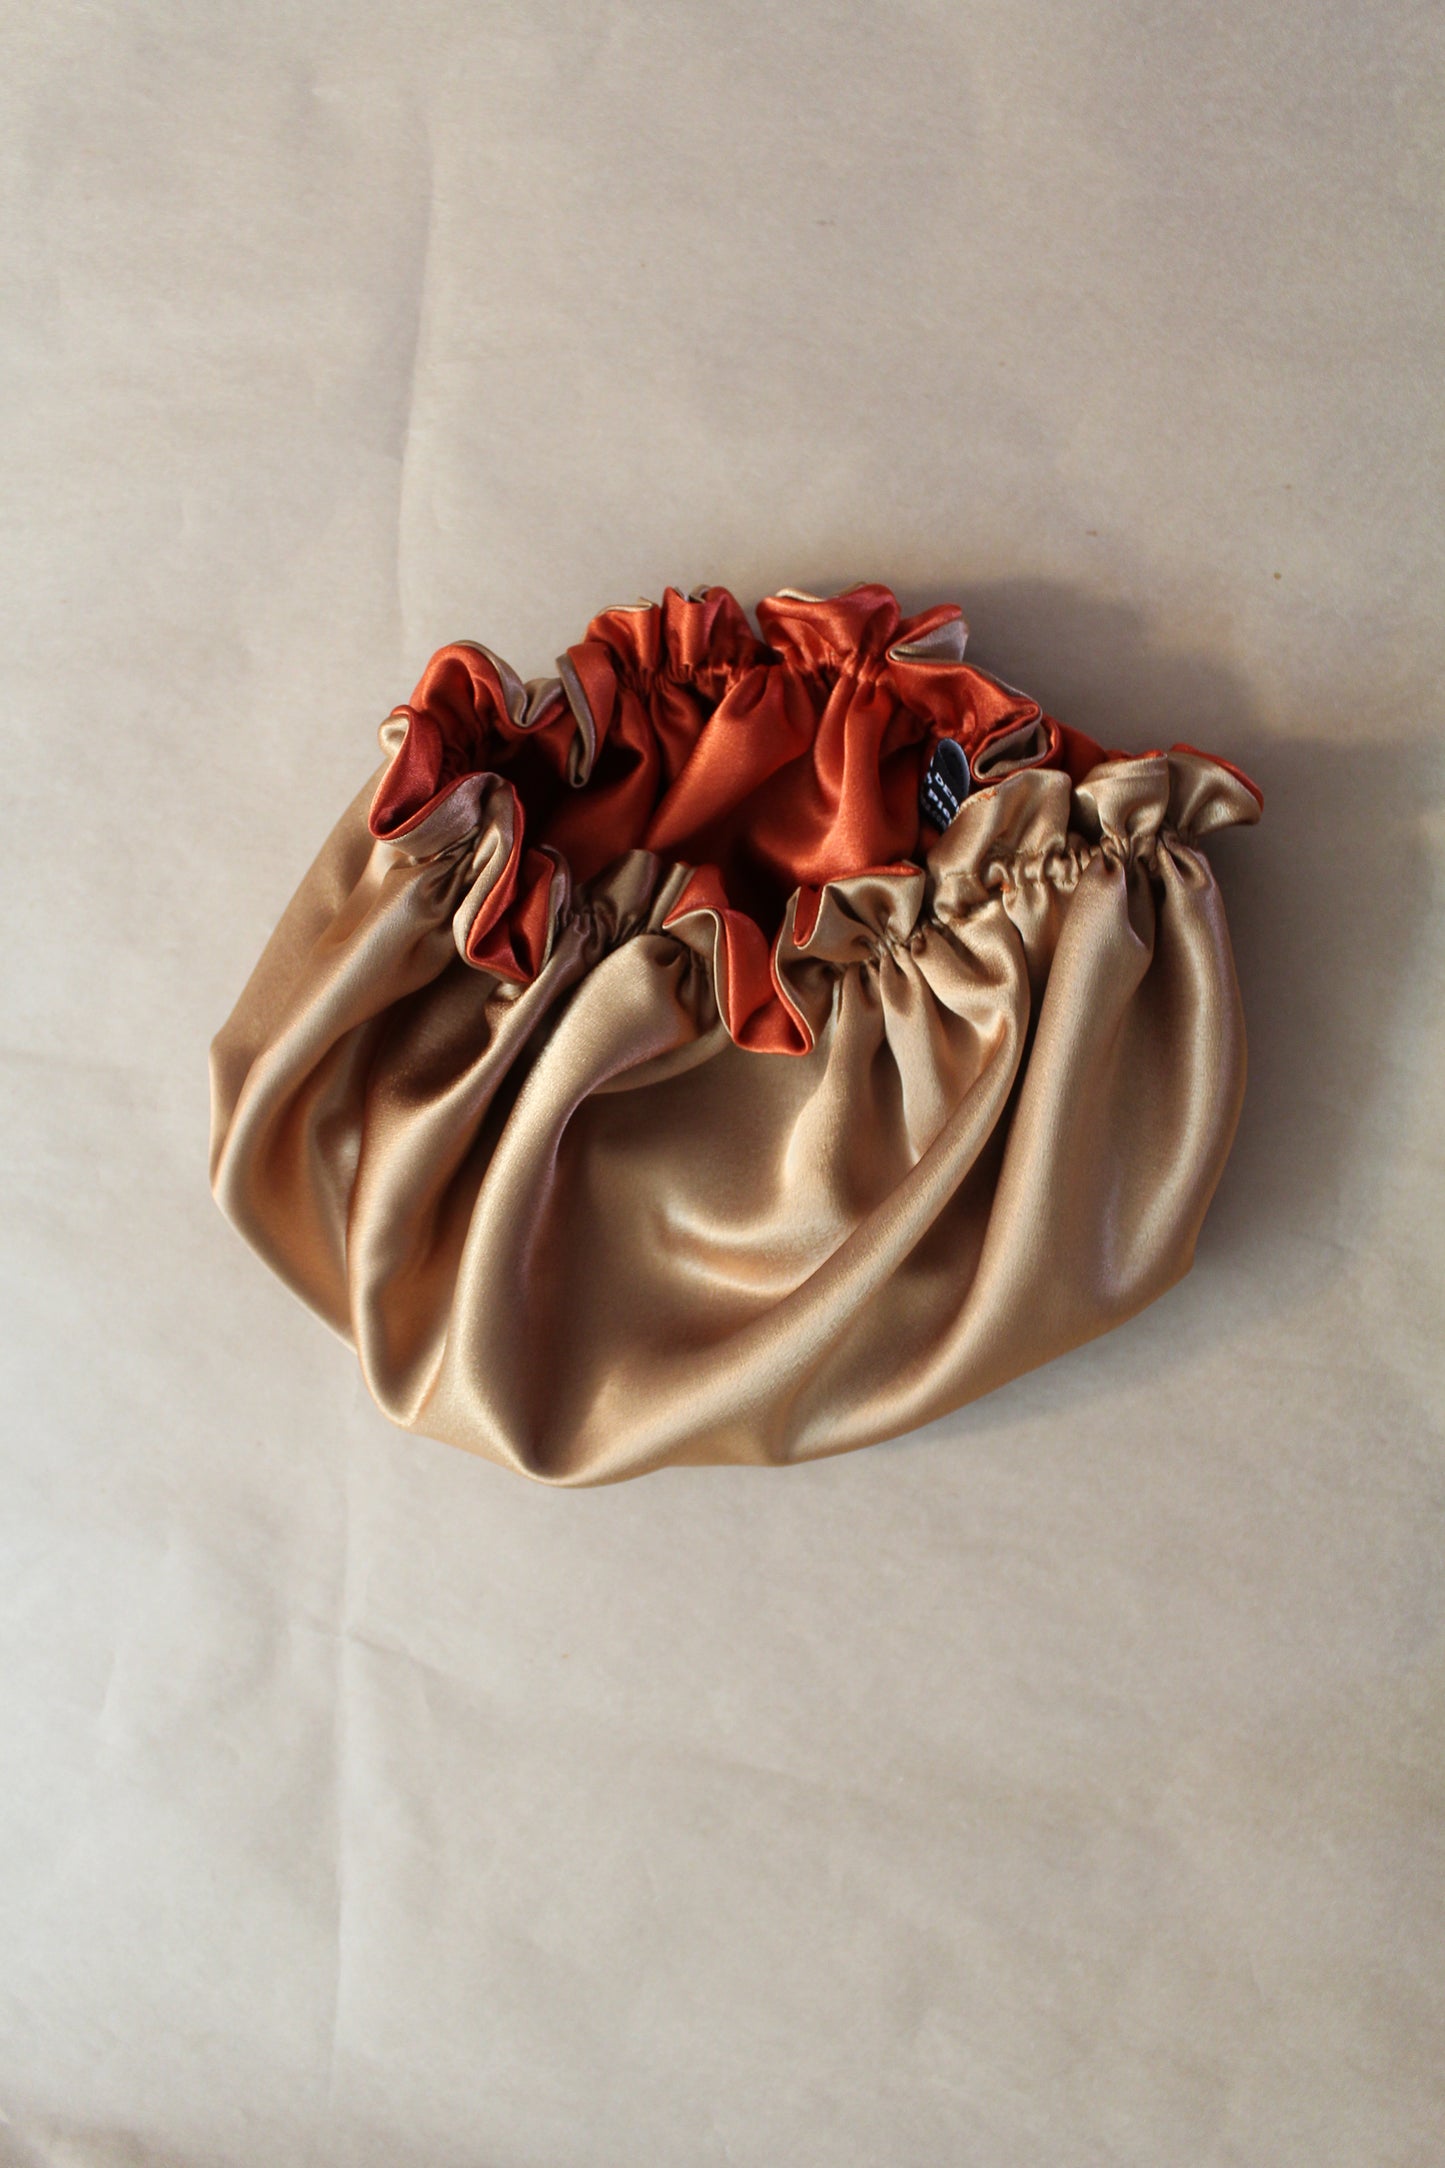 The Lydya  Reversible Satin colored Bonnets